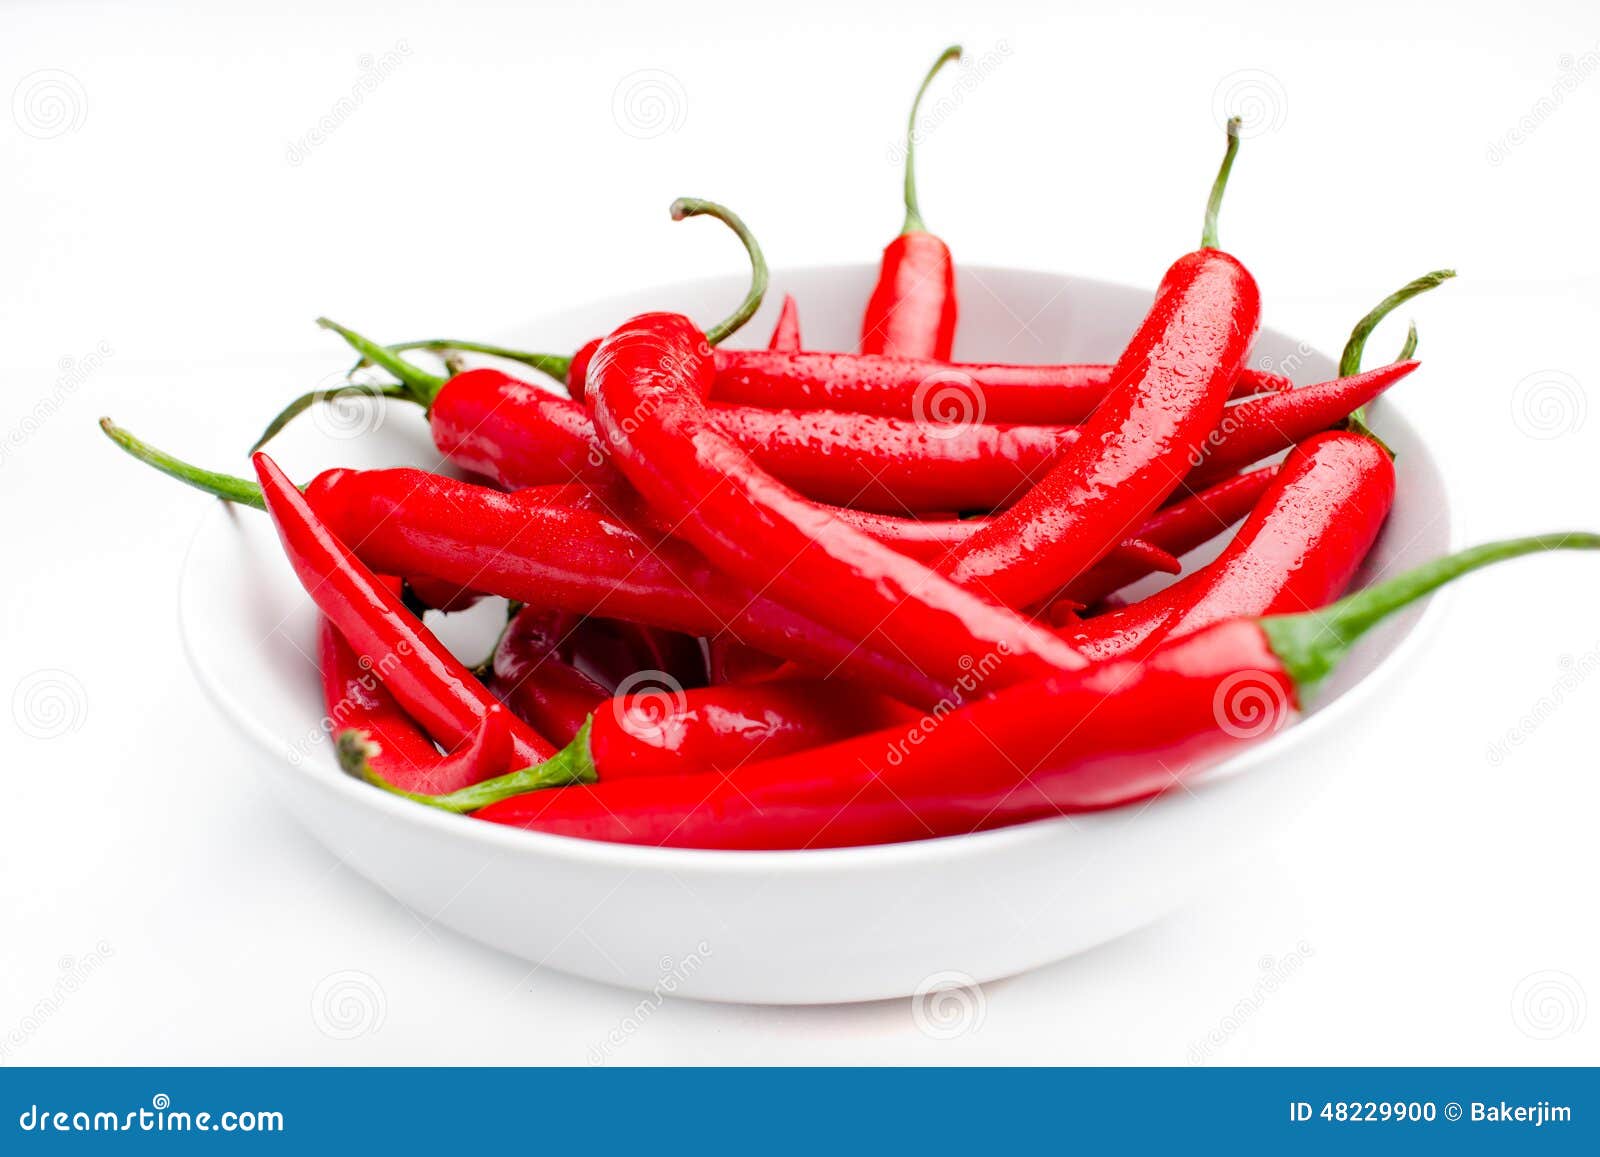 moist red peppers